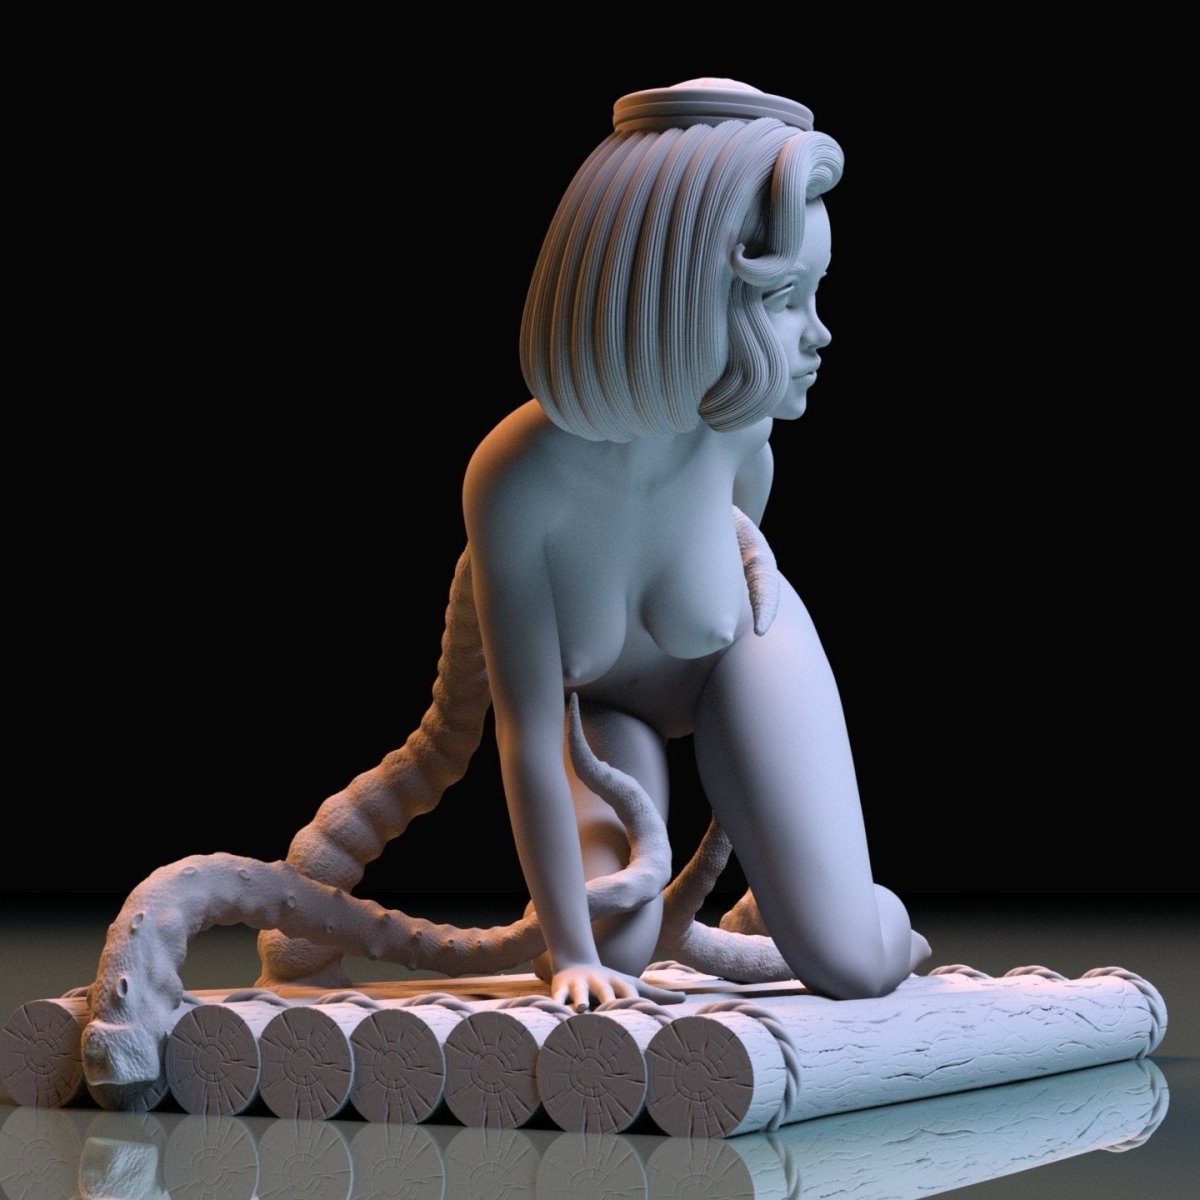 NSFW Resin Miniature Sailor Girl and tentacles NSFW 3D Printed Figurine Fanart Unpainted Miniature Collectibles